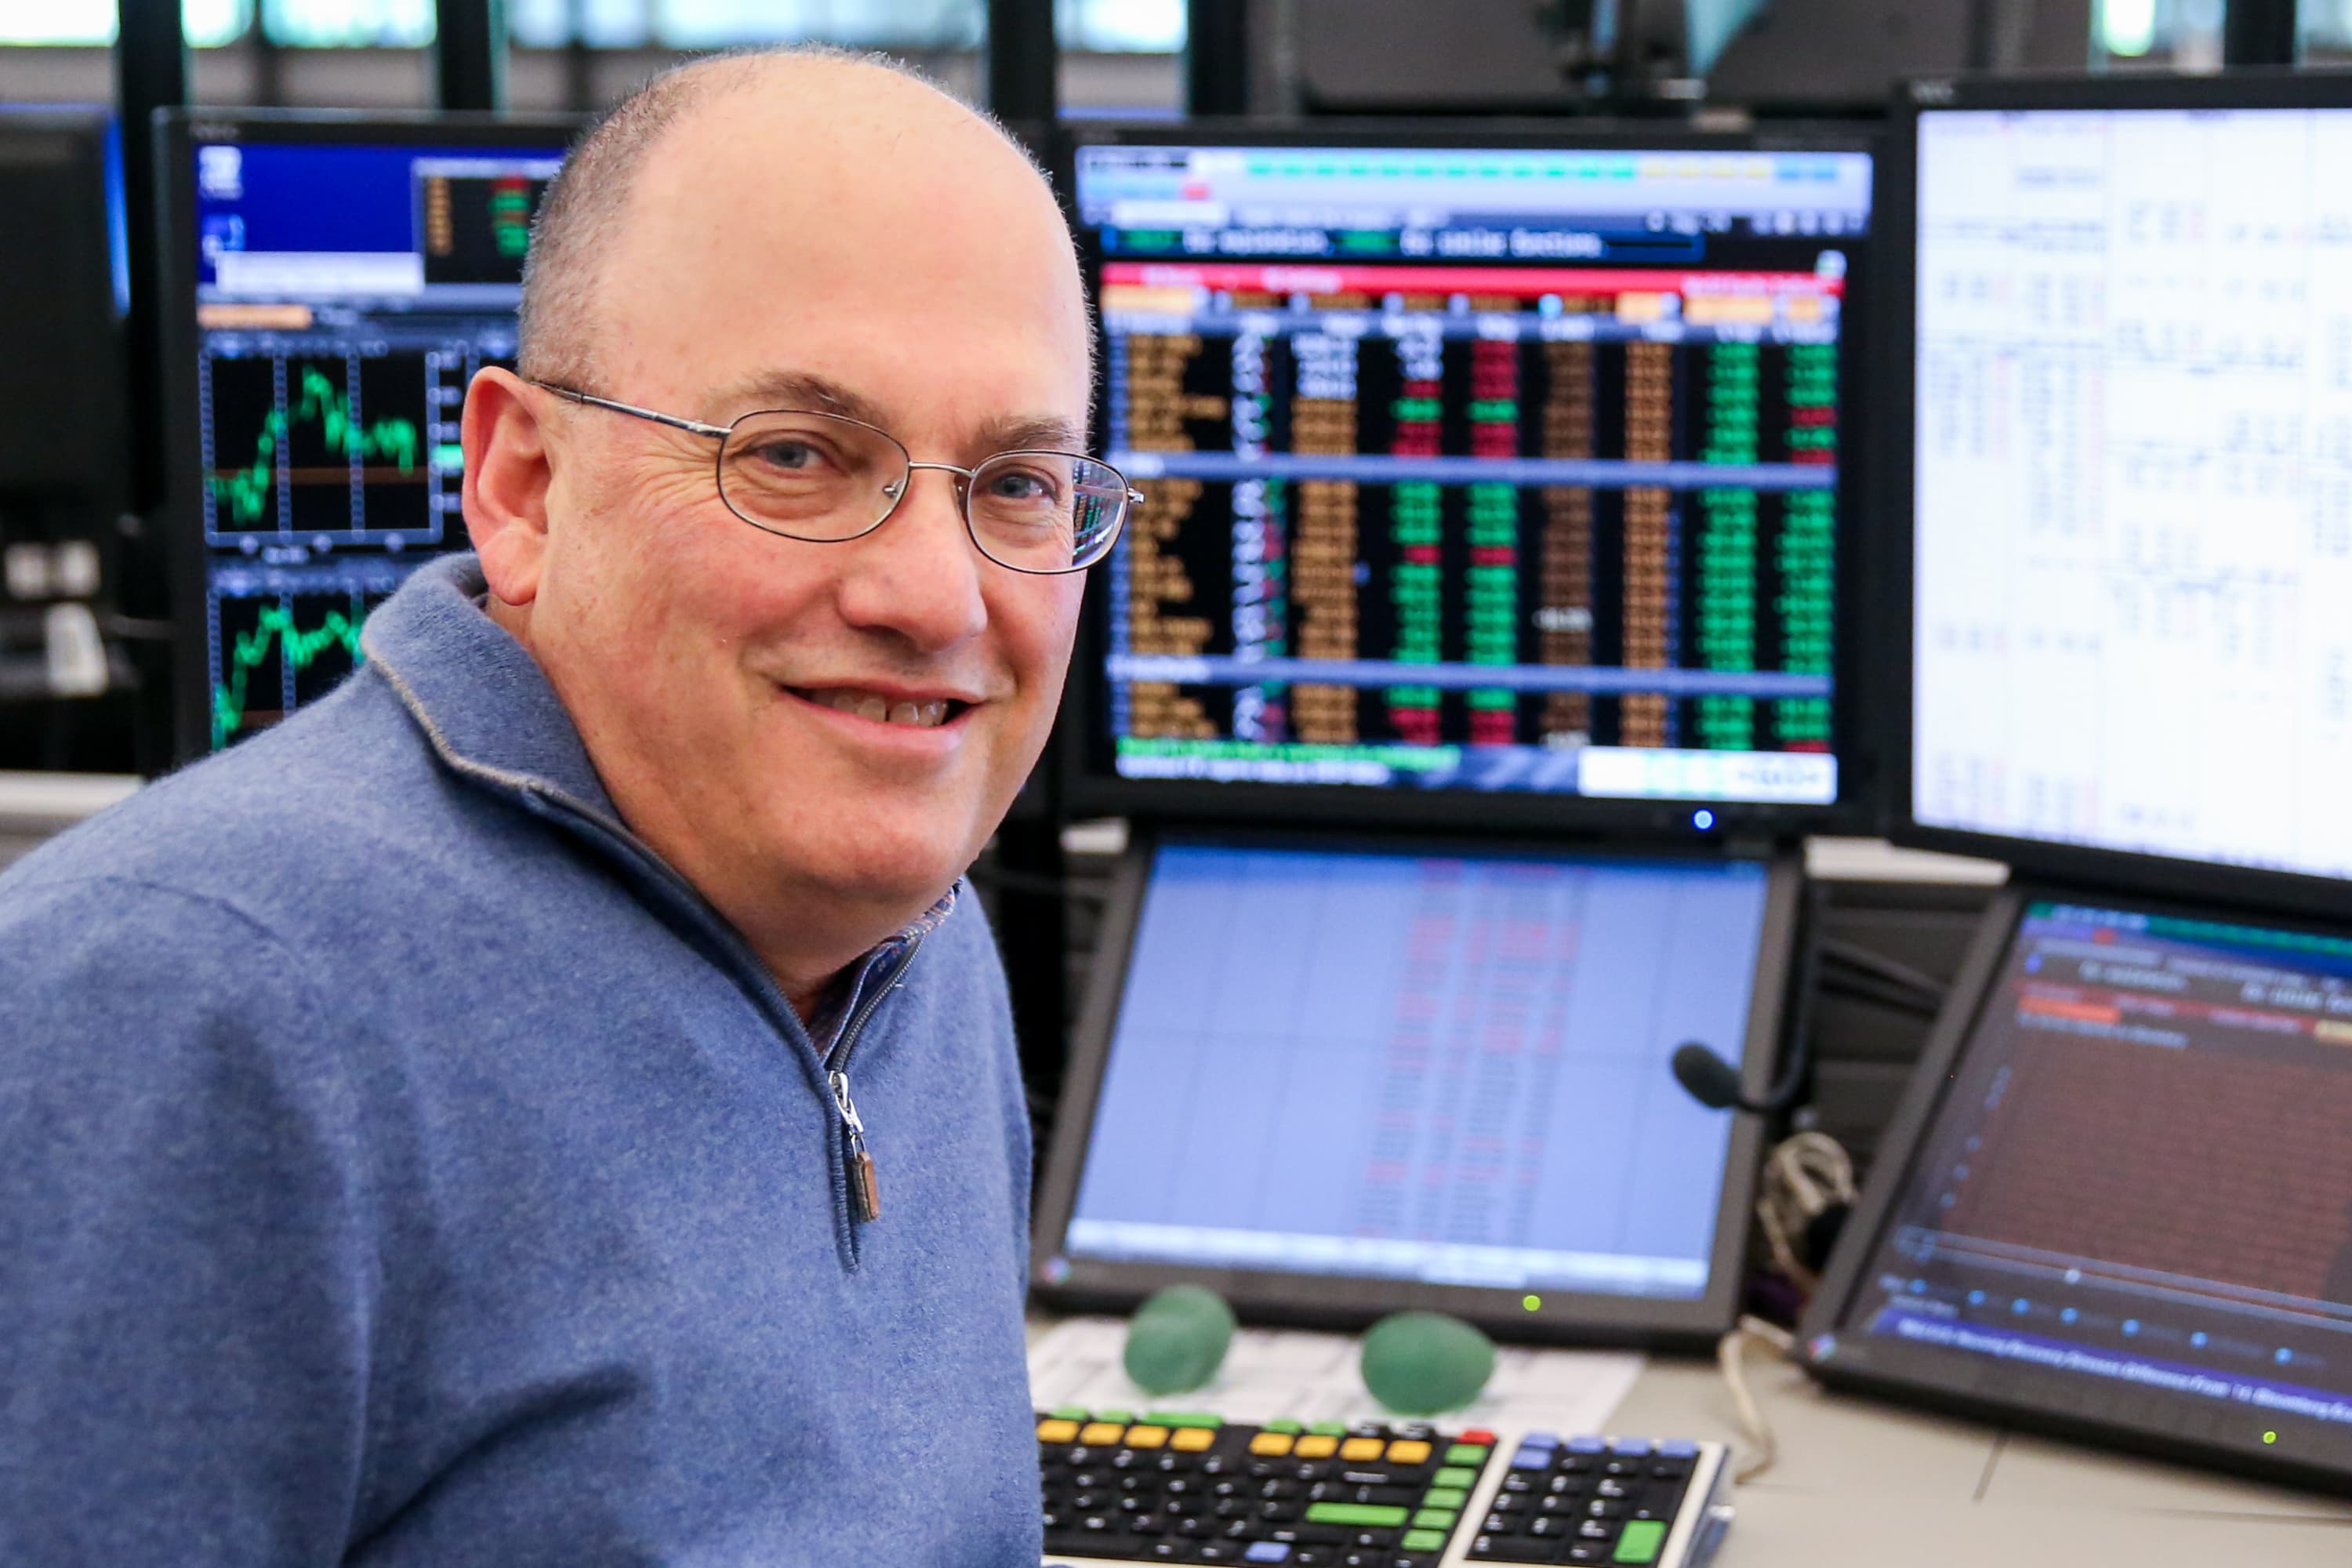 Billionaire investor Steve Cohen: 'After an earthquake there are tremors'